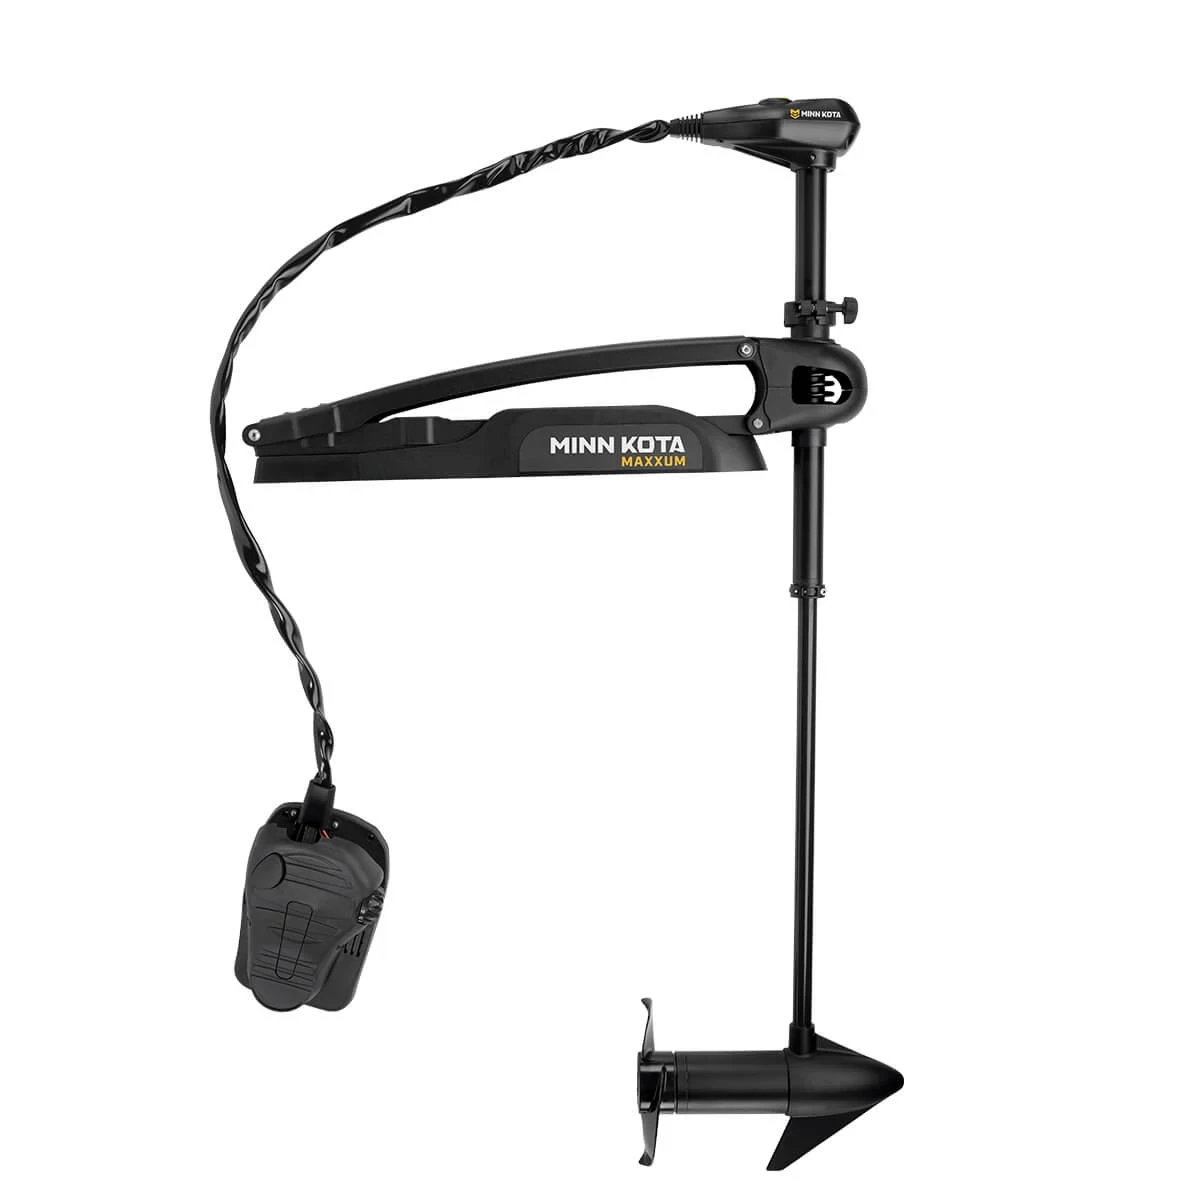 Maxxum 70 pound thrust trolling motor with foot pedal